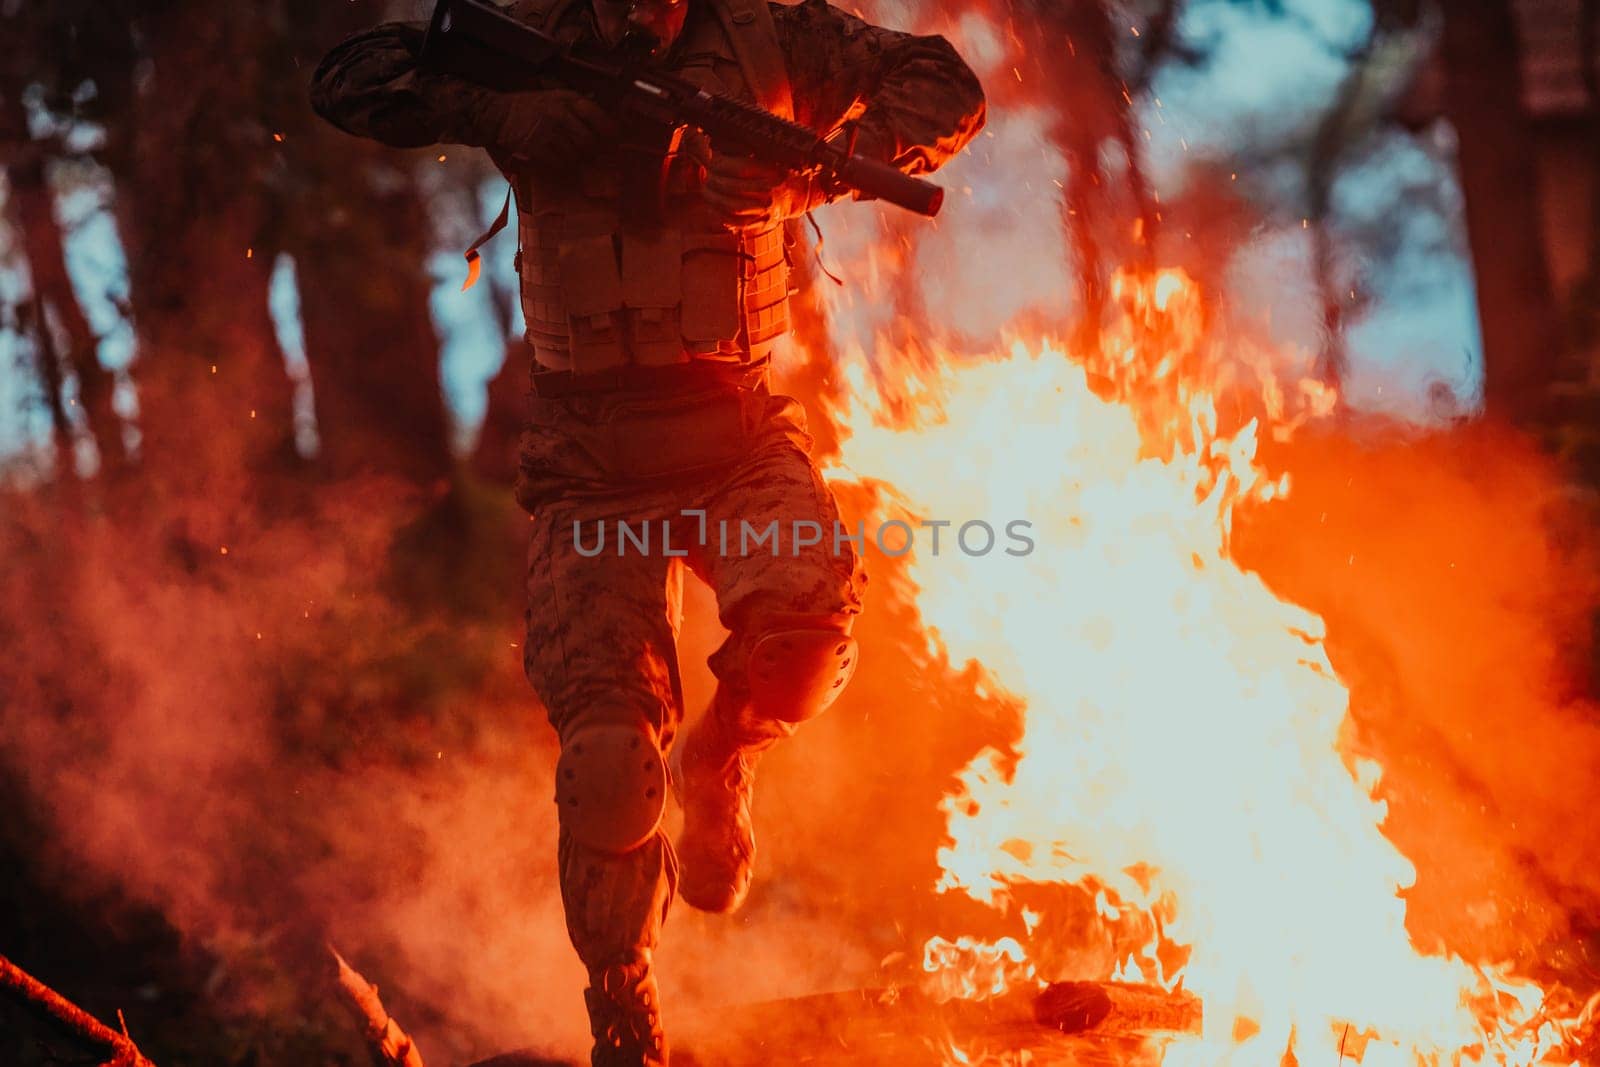 Soldier in Action at Night in the Forest Area. Night Time Military Mission jumping over fire.